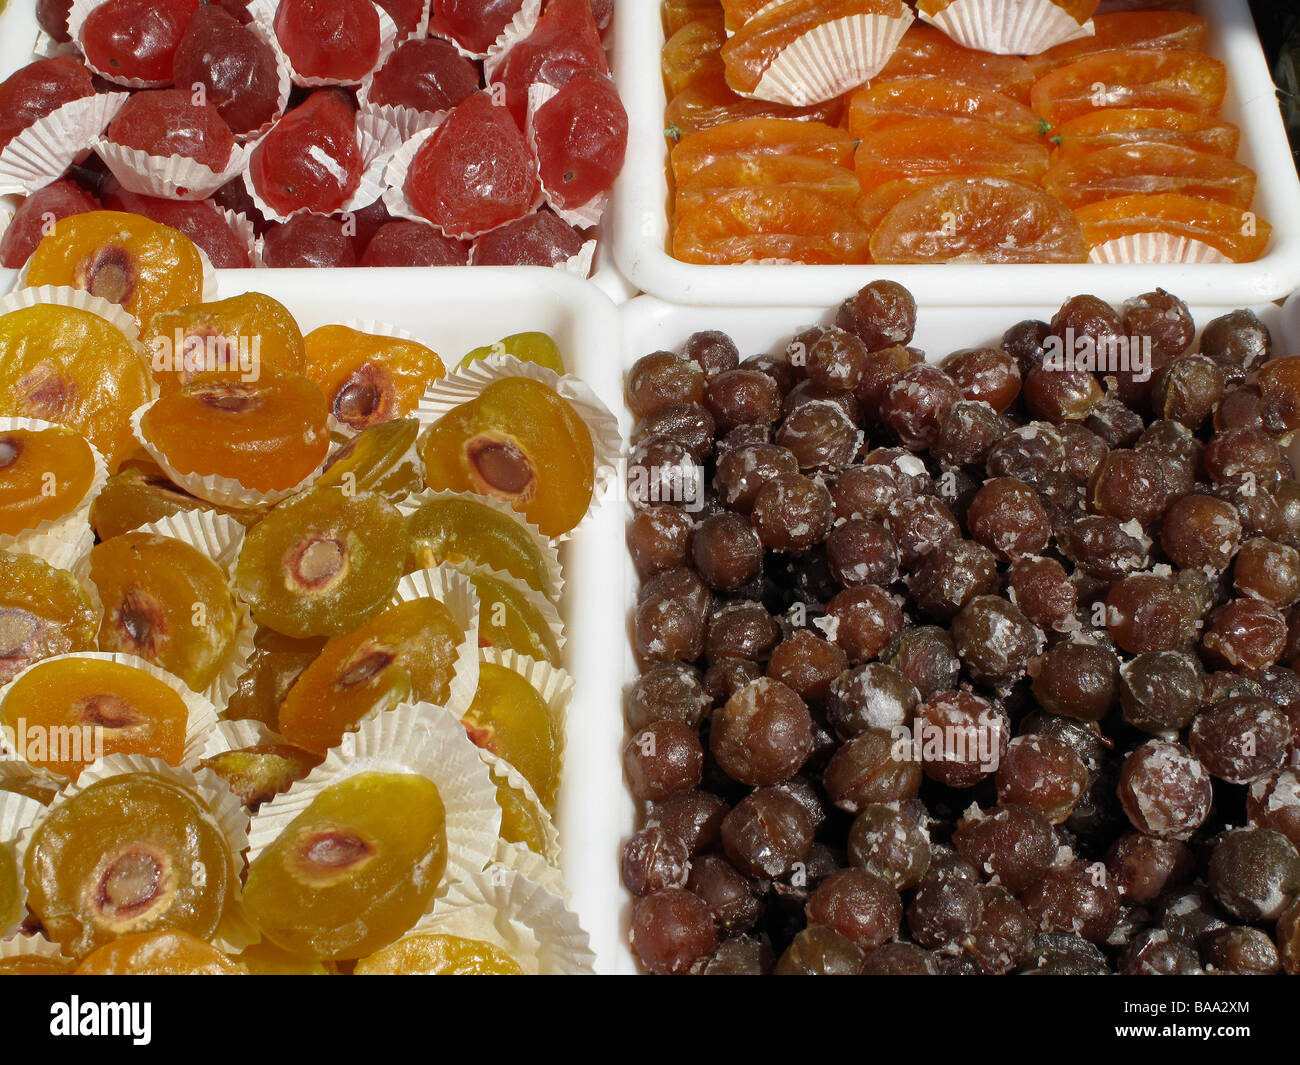 Candied fruit on sale in Nice market, France Stock Photo